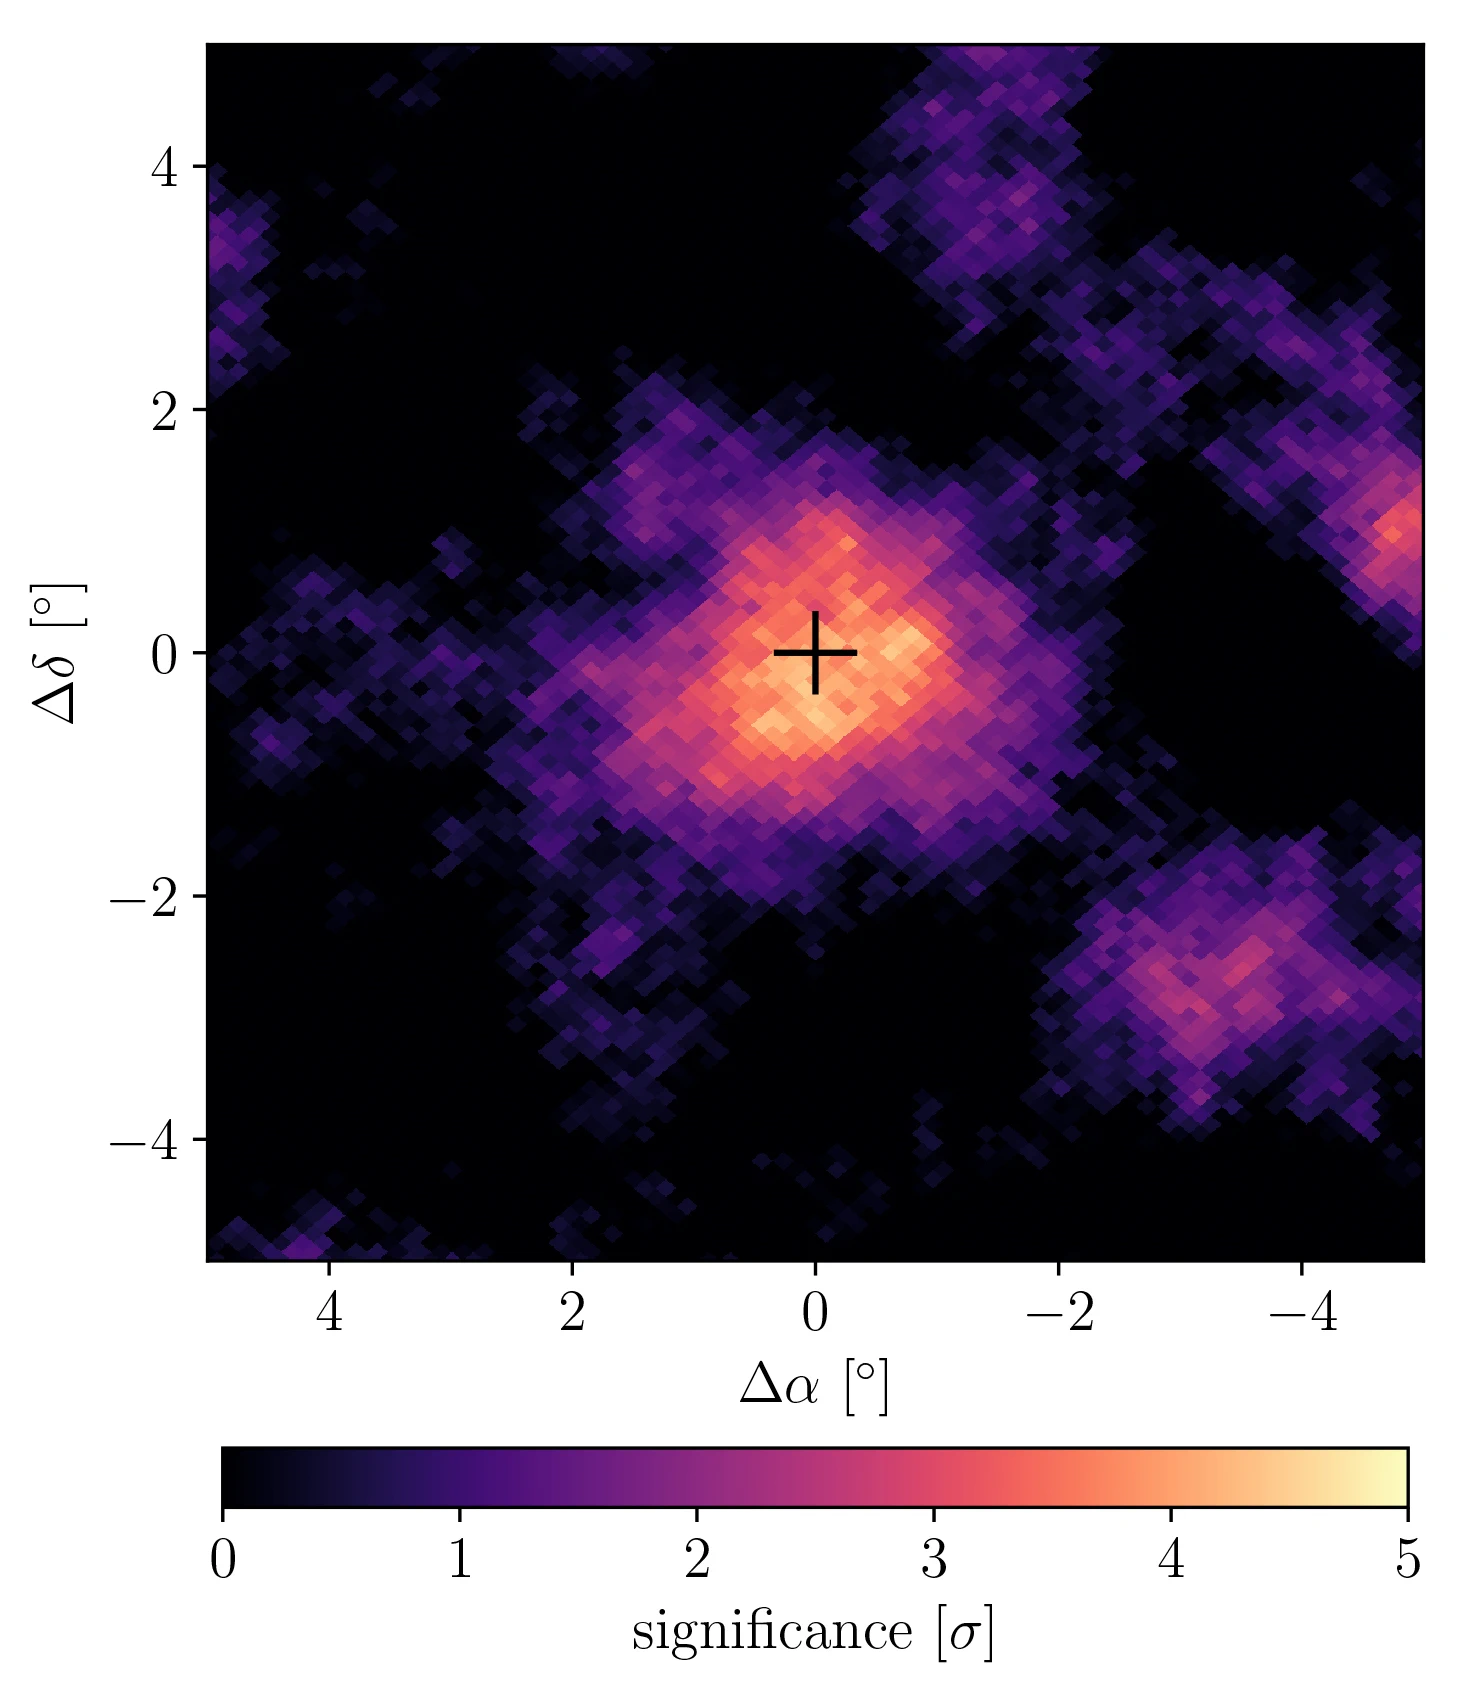 A figure that looks like a heat map shows a bright yellow spot at its center, ringed by “cooler” oranges and purples. This represents the excess of gamma rays observed by the HAWC Collaboration.